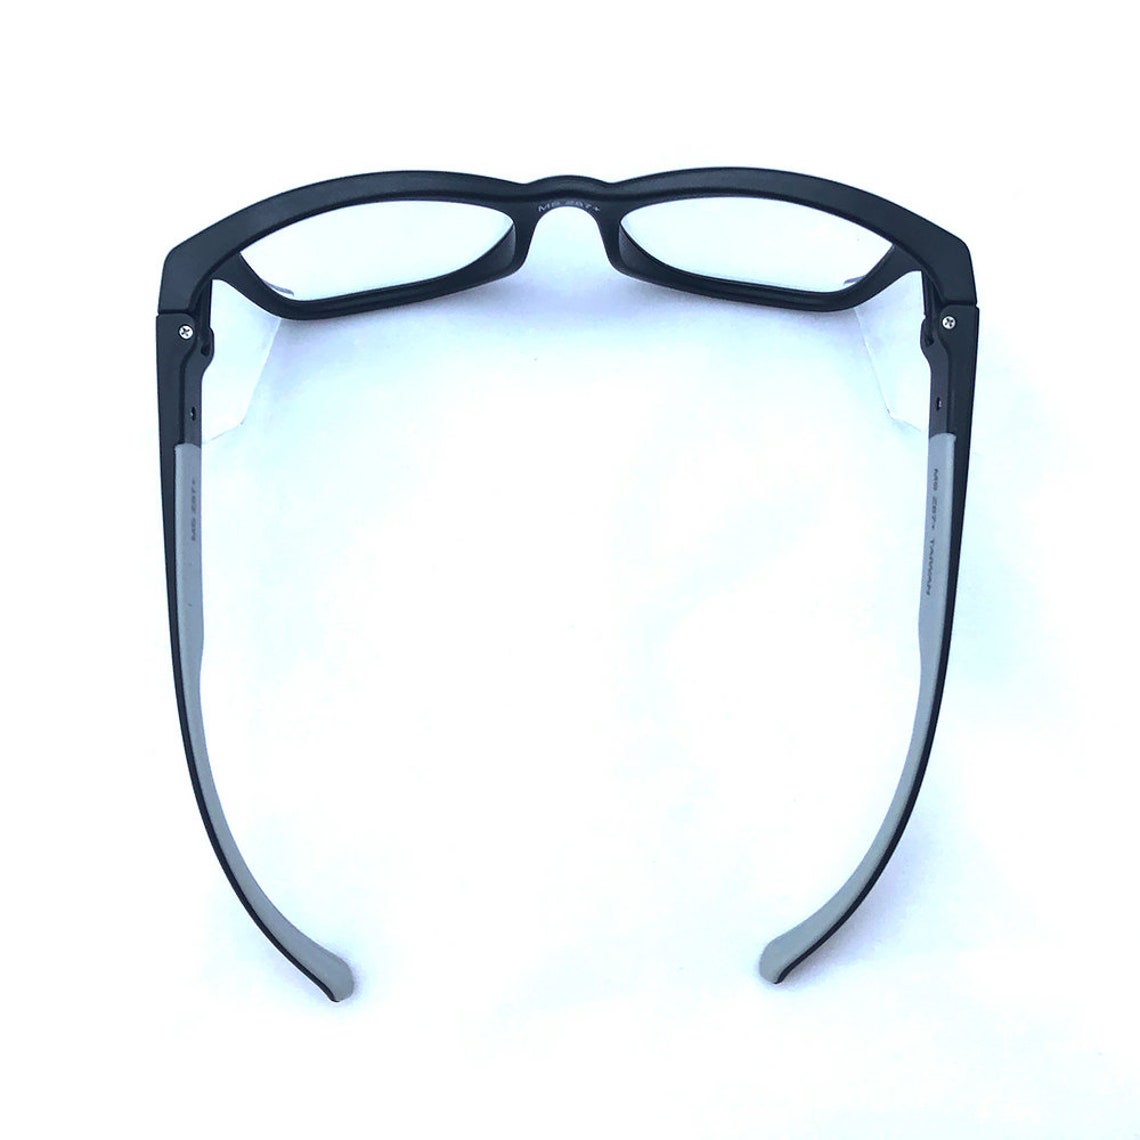 Ray Ban Style Safety Glasses ANSI Approved Scratch Resistant Fog ...